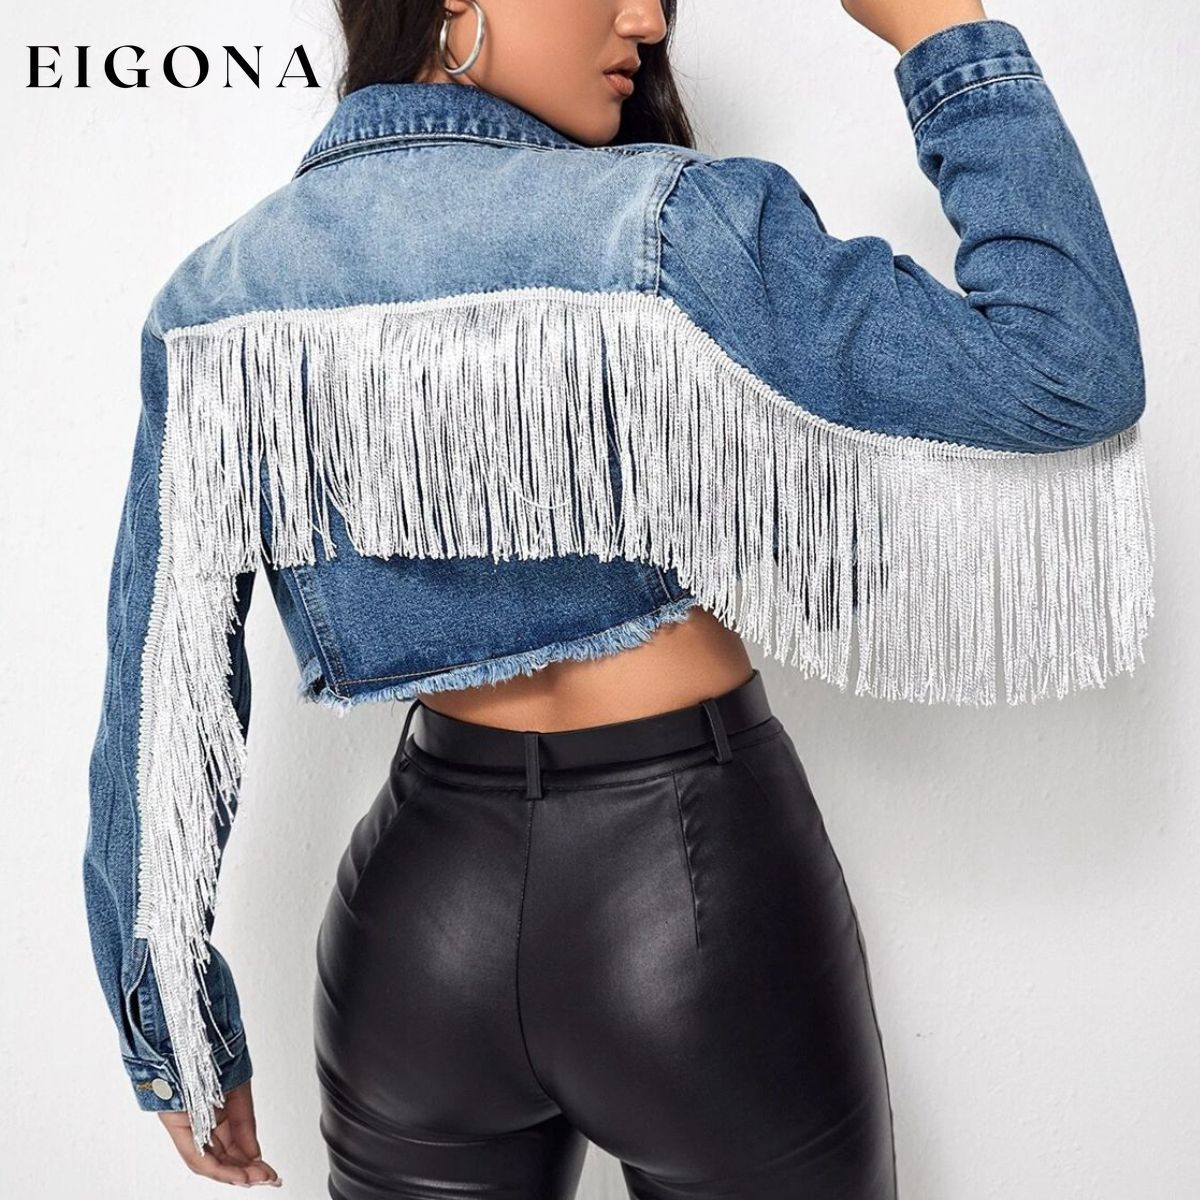 Fringe Detail Long Sleeve Cropped Denim Jacket ASZ@Denim clothes Denim Jacket denim jackets jean jackets Ship From Overseas Shipping Delay 09/29/2023 - 10/03/2023